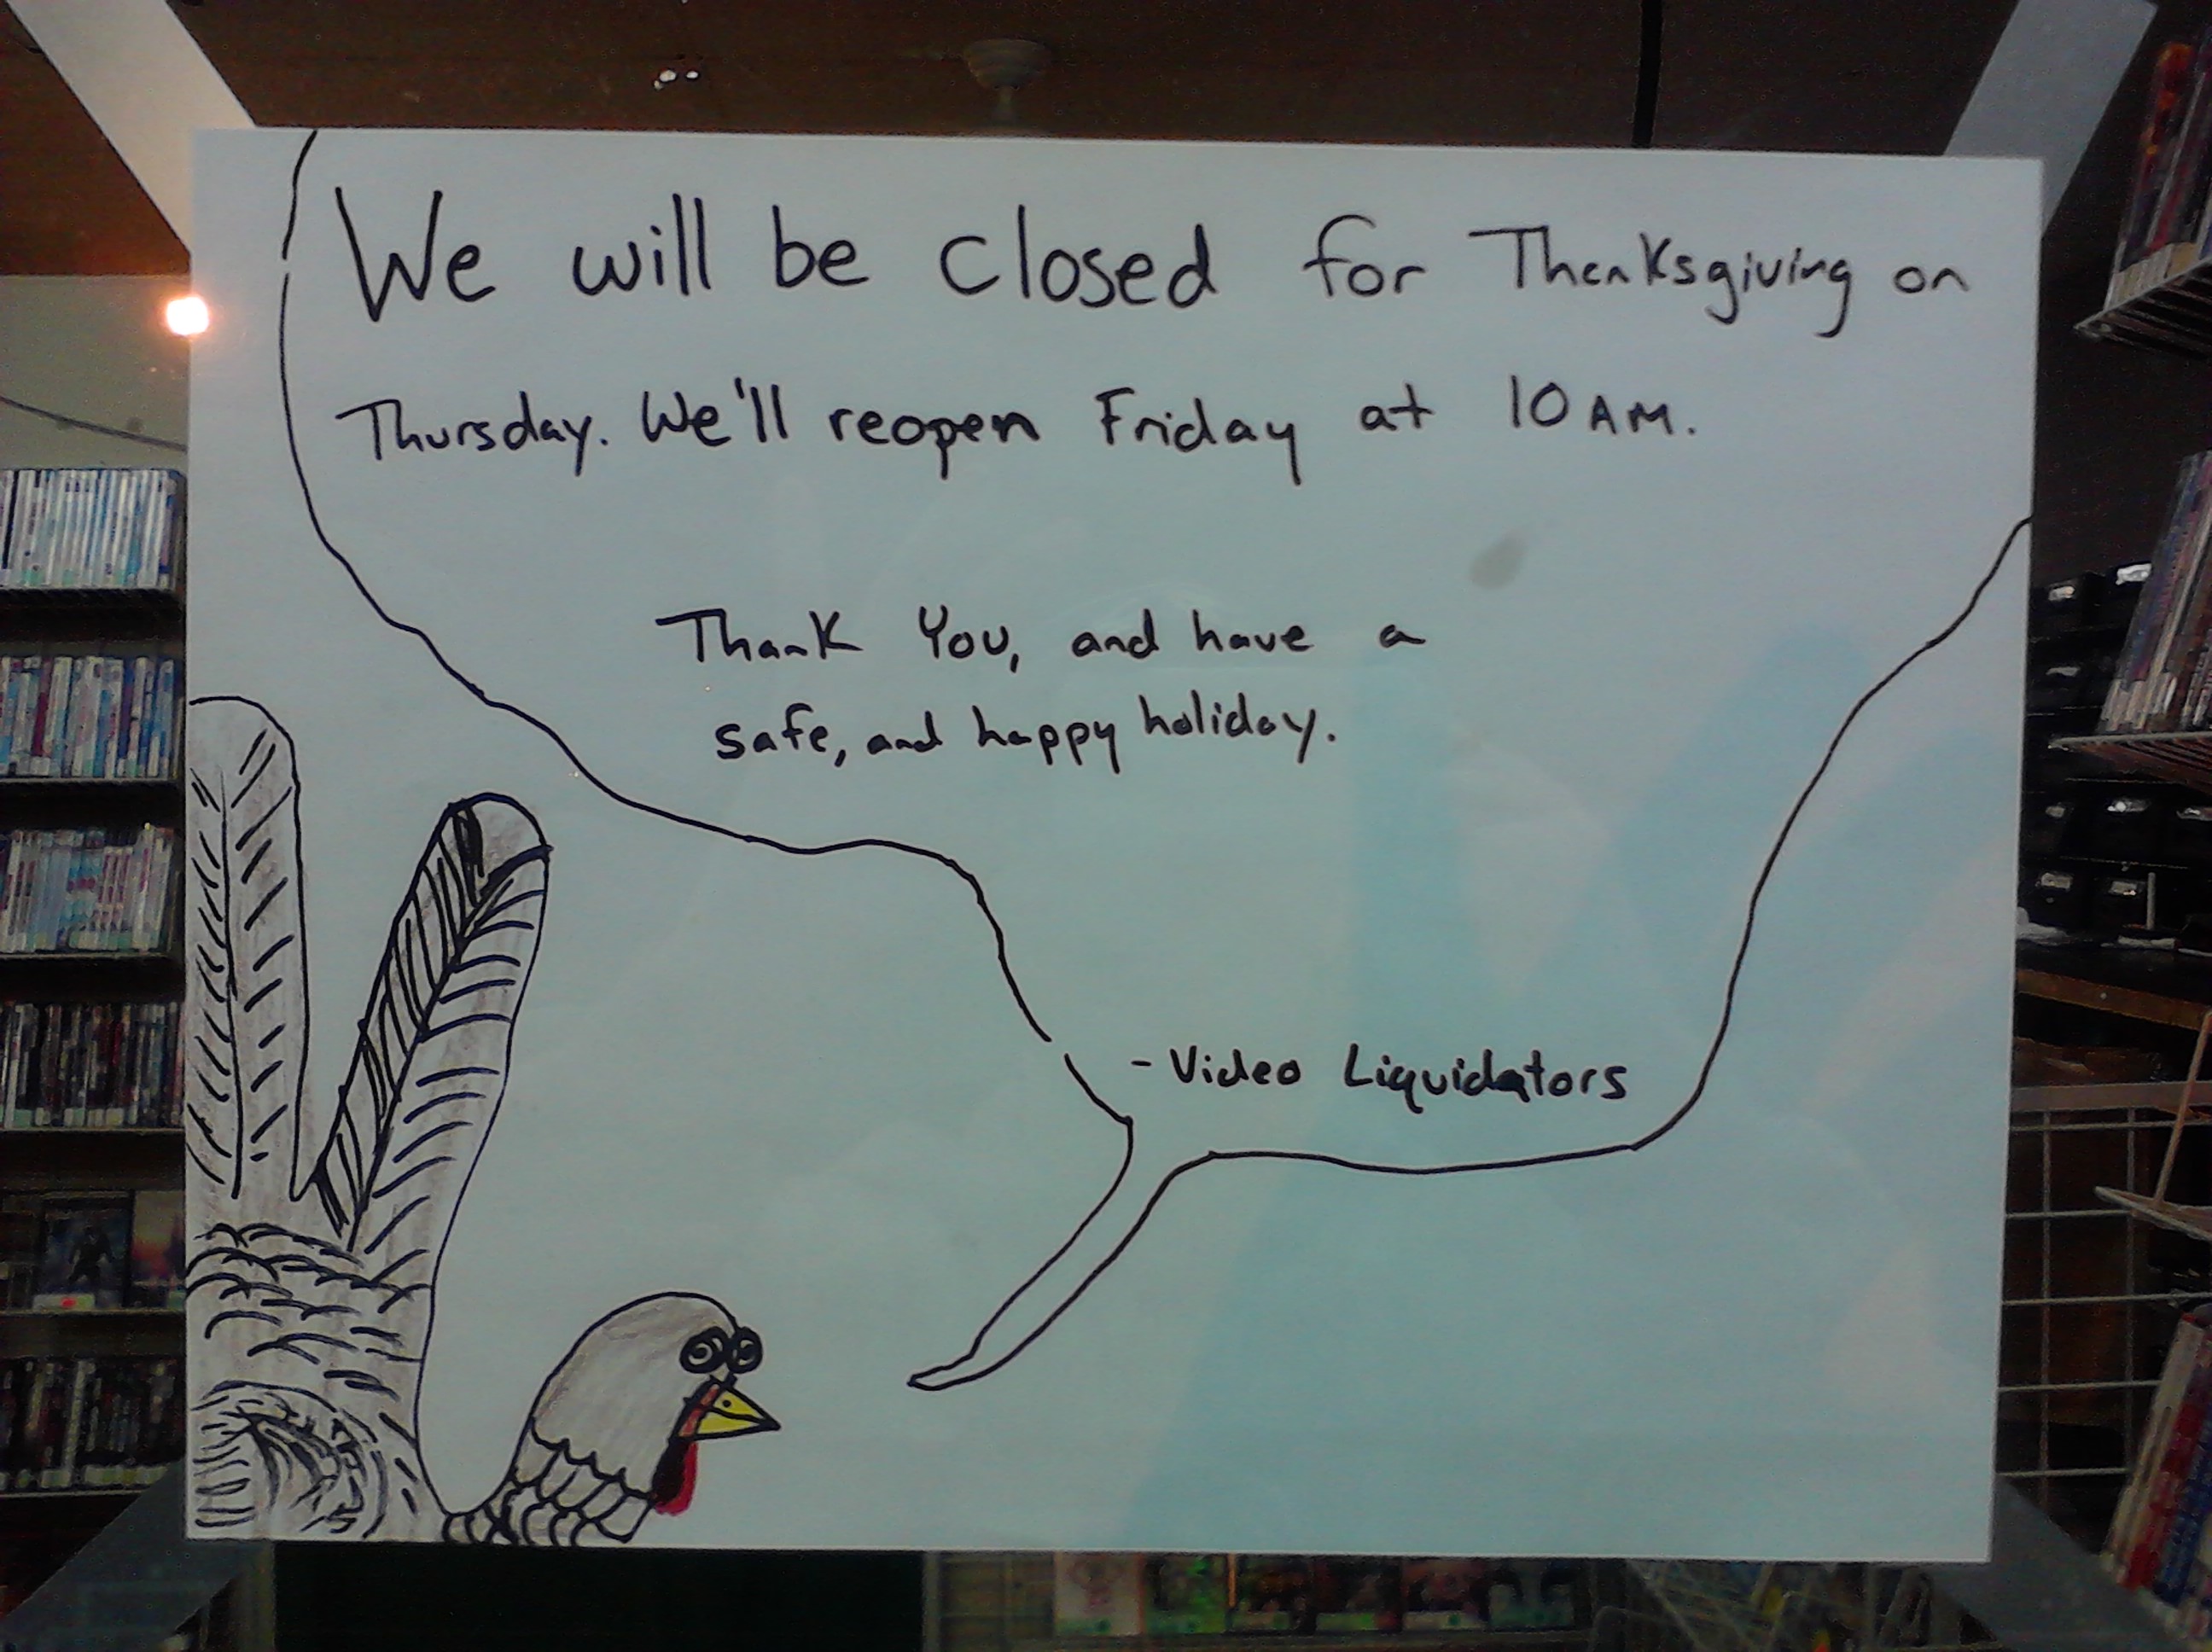 Figured that I'd submit the closed for Thanksgiving sign I made for the Porn Shop door last year which featured a hand turkey.